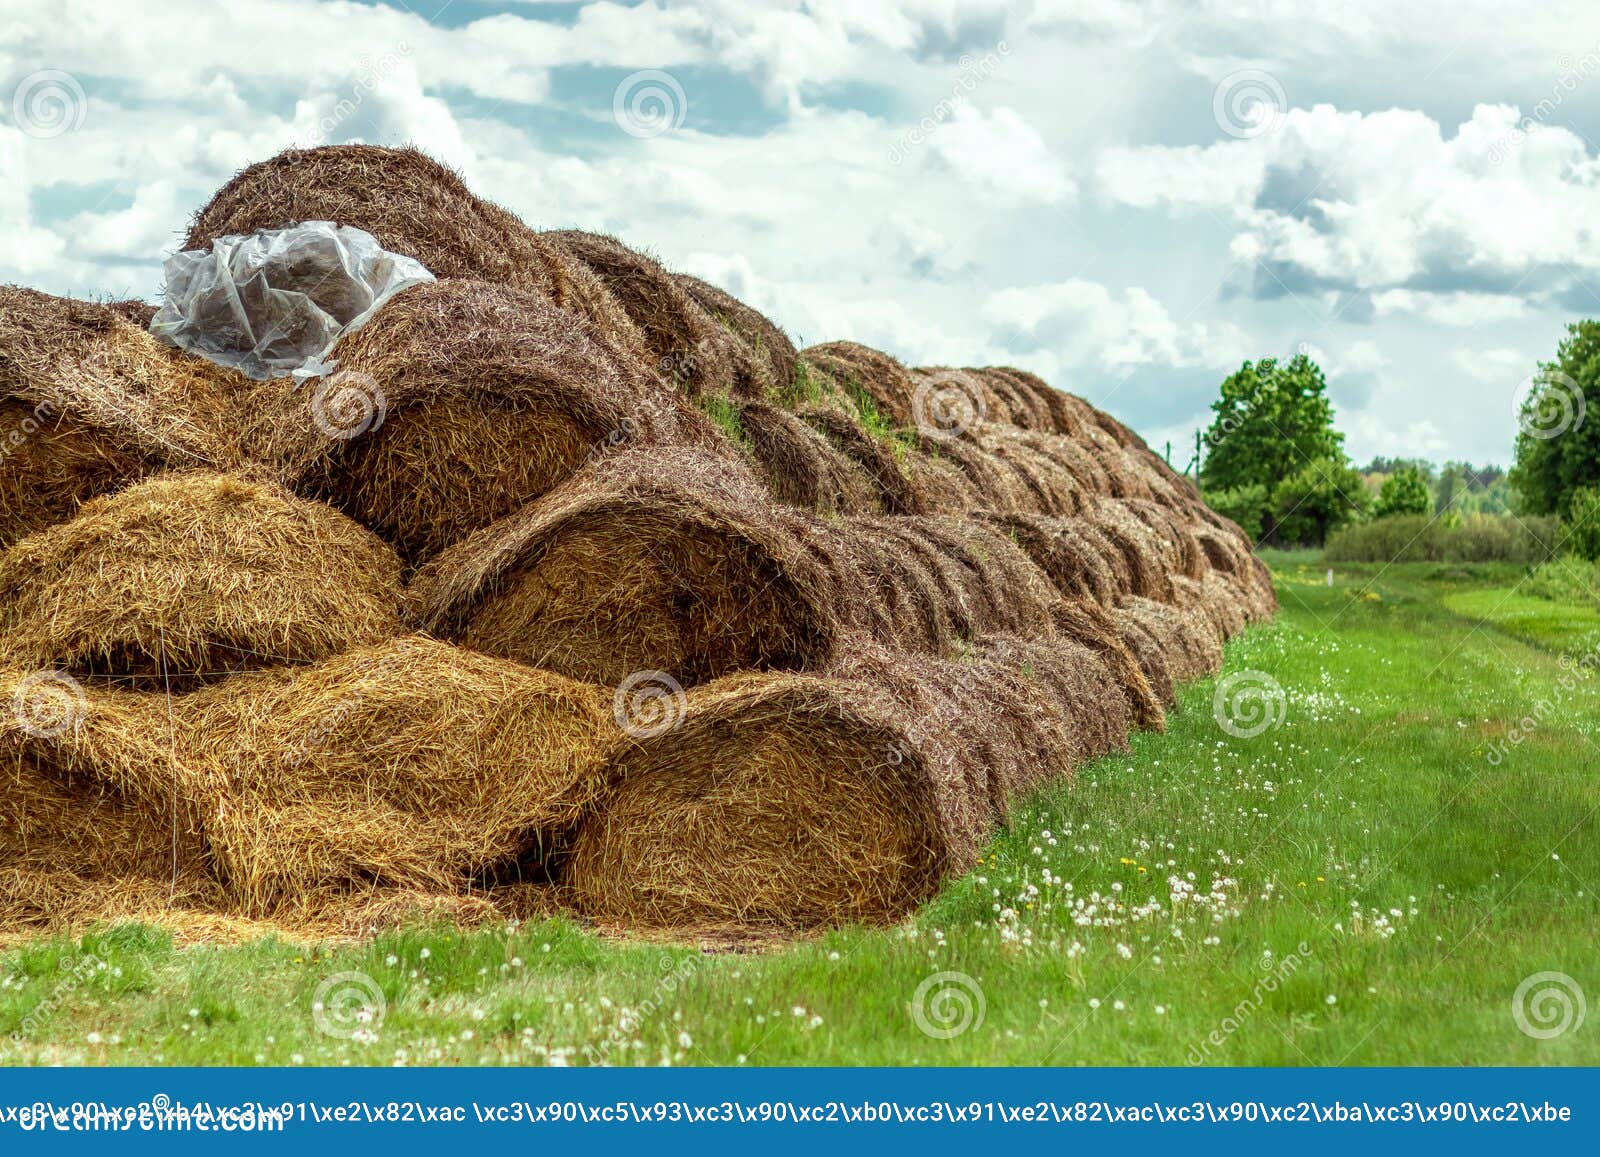 Large Bales of Hay are Stacked in Large Piles on the Field. the Concept of Animal  Feed, Harvest Storage, Harvesting in Agriculture Stock Photo - Image of  farming, countryside: 190990850